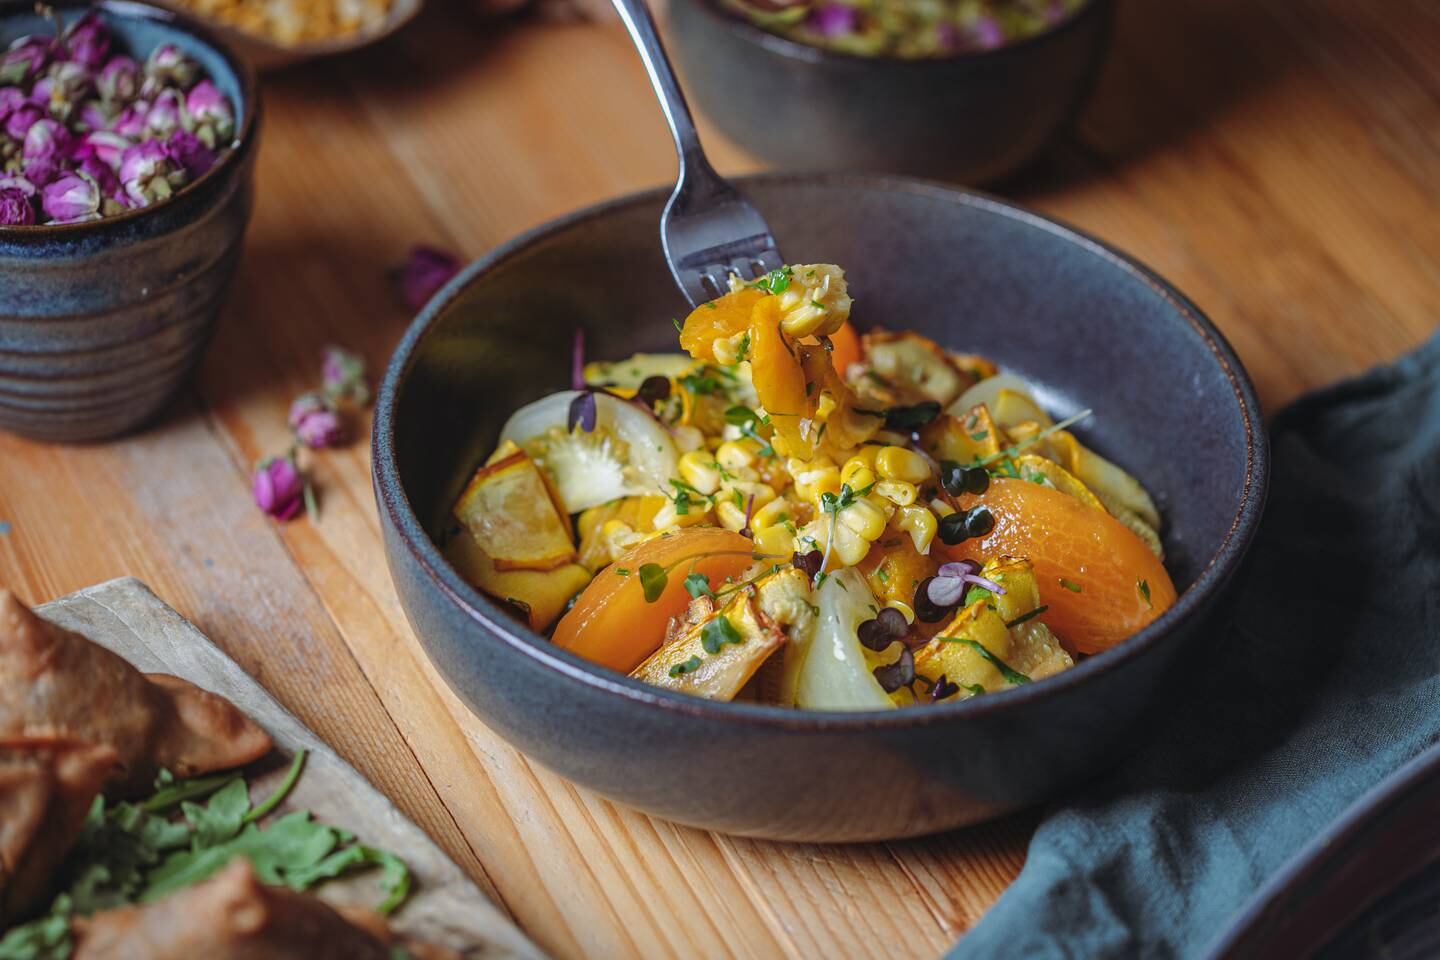 The yellow salad is a medley of yellow produce sourced from local artisanal farmers. Photo: farm2table